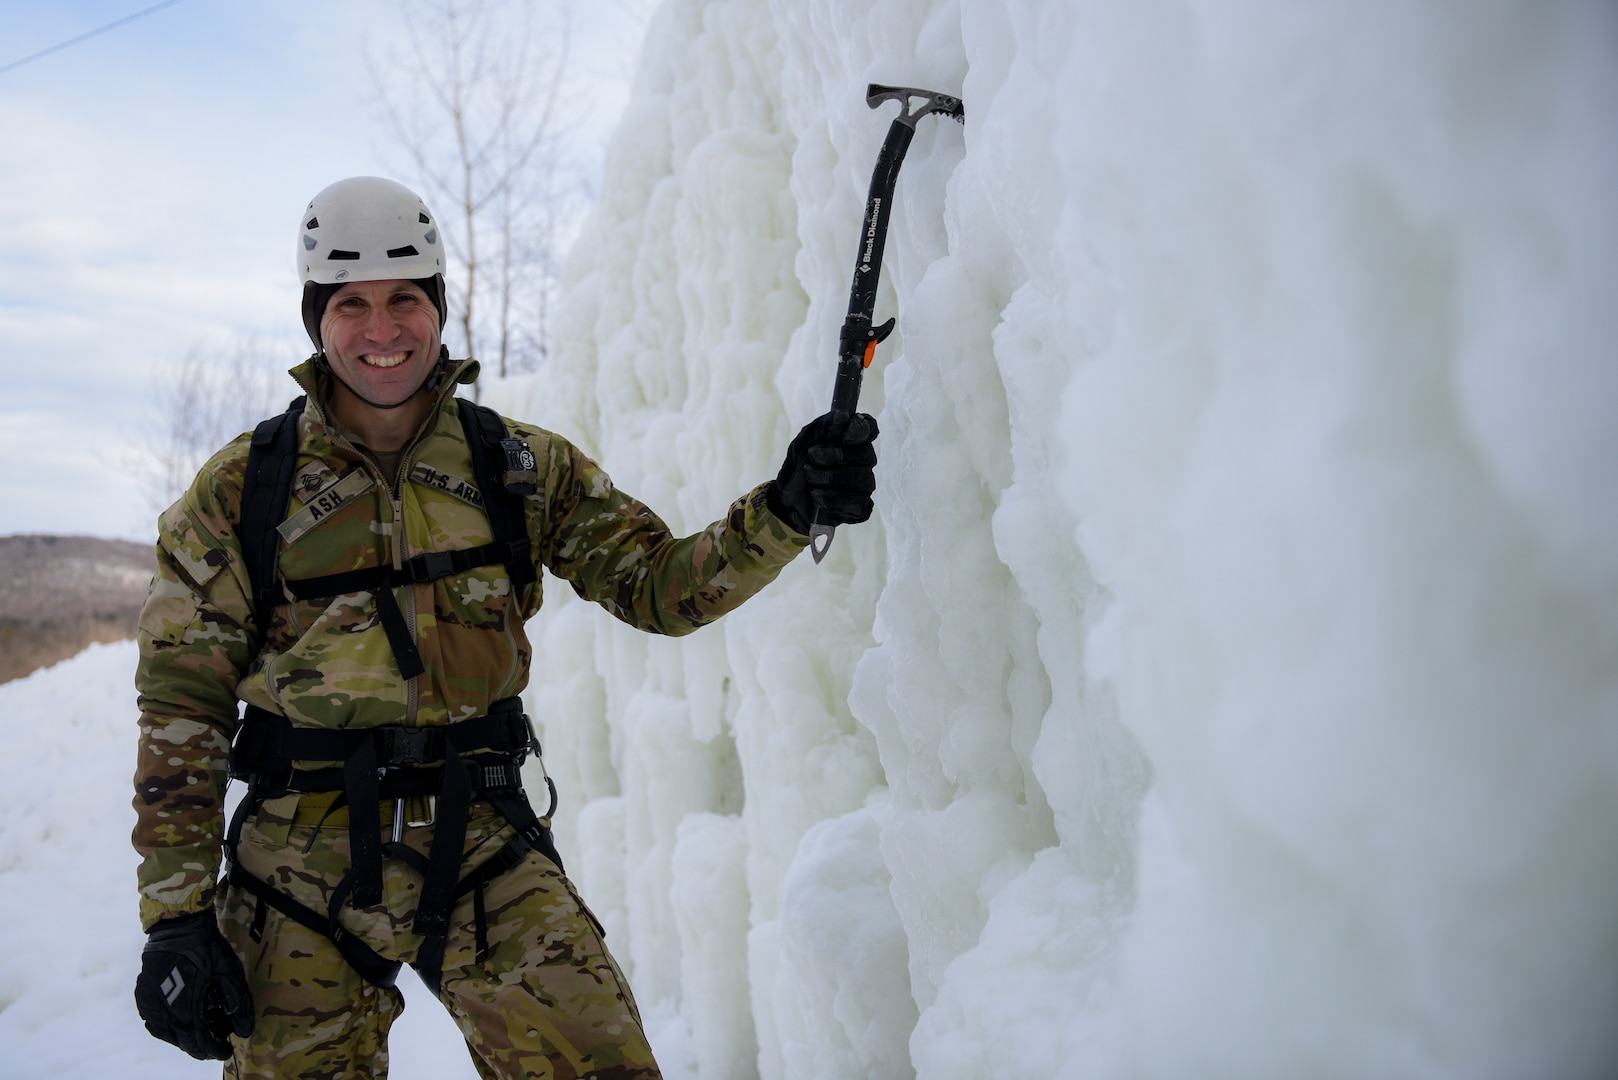 Sgt. 1st Class Nick Ash, an instructor at the U.S. Army Mountain Warfare School at Camp Ethan Allen Training Site, Vermont, at the school’s ice wall during the Advanced Military Mountaineer Course Jan. 23, 2022.